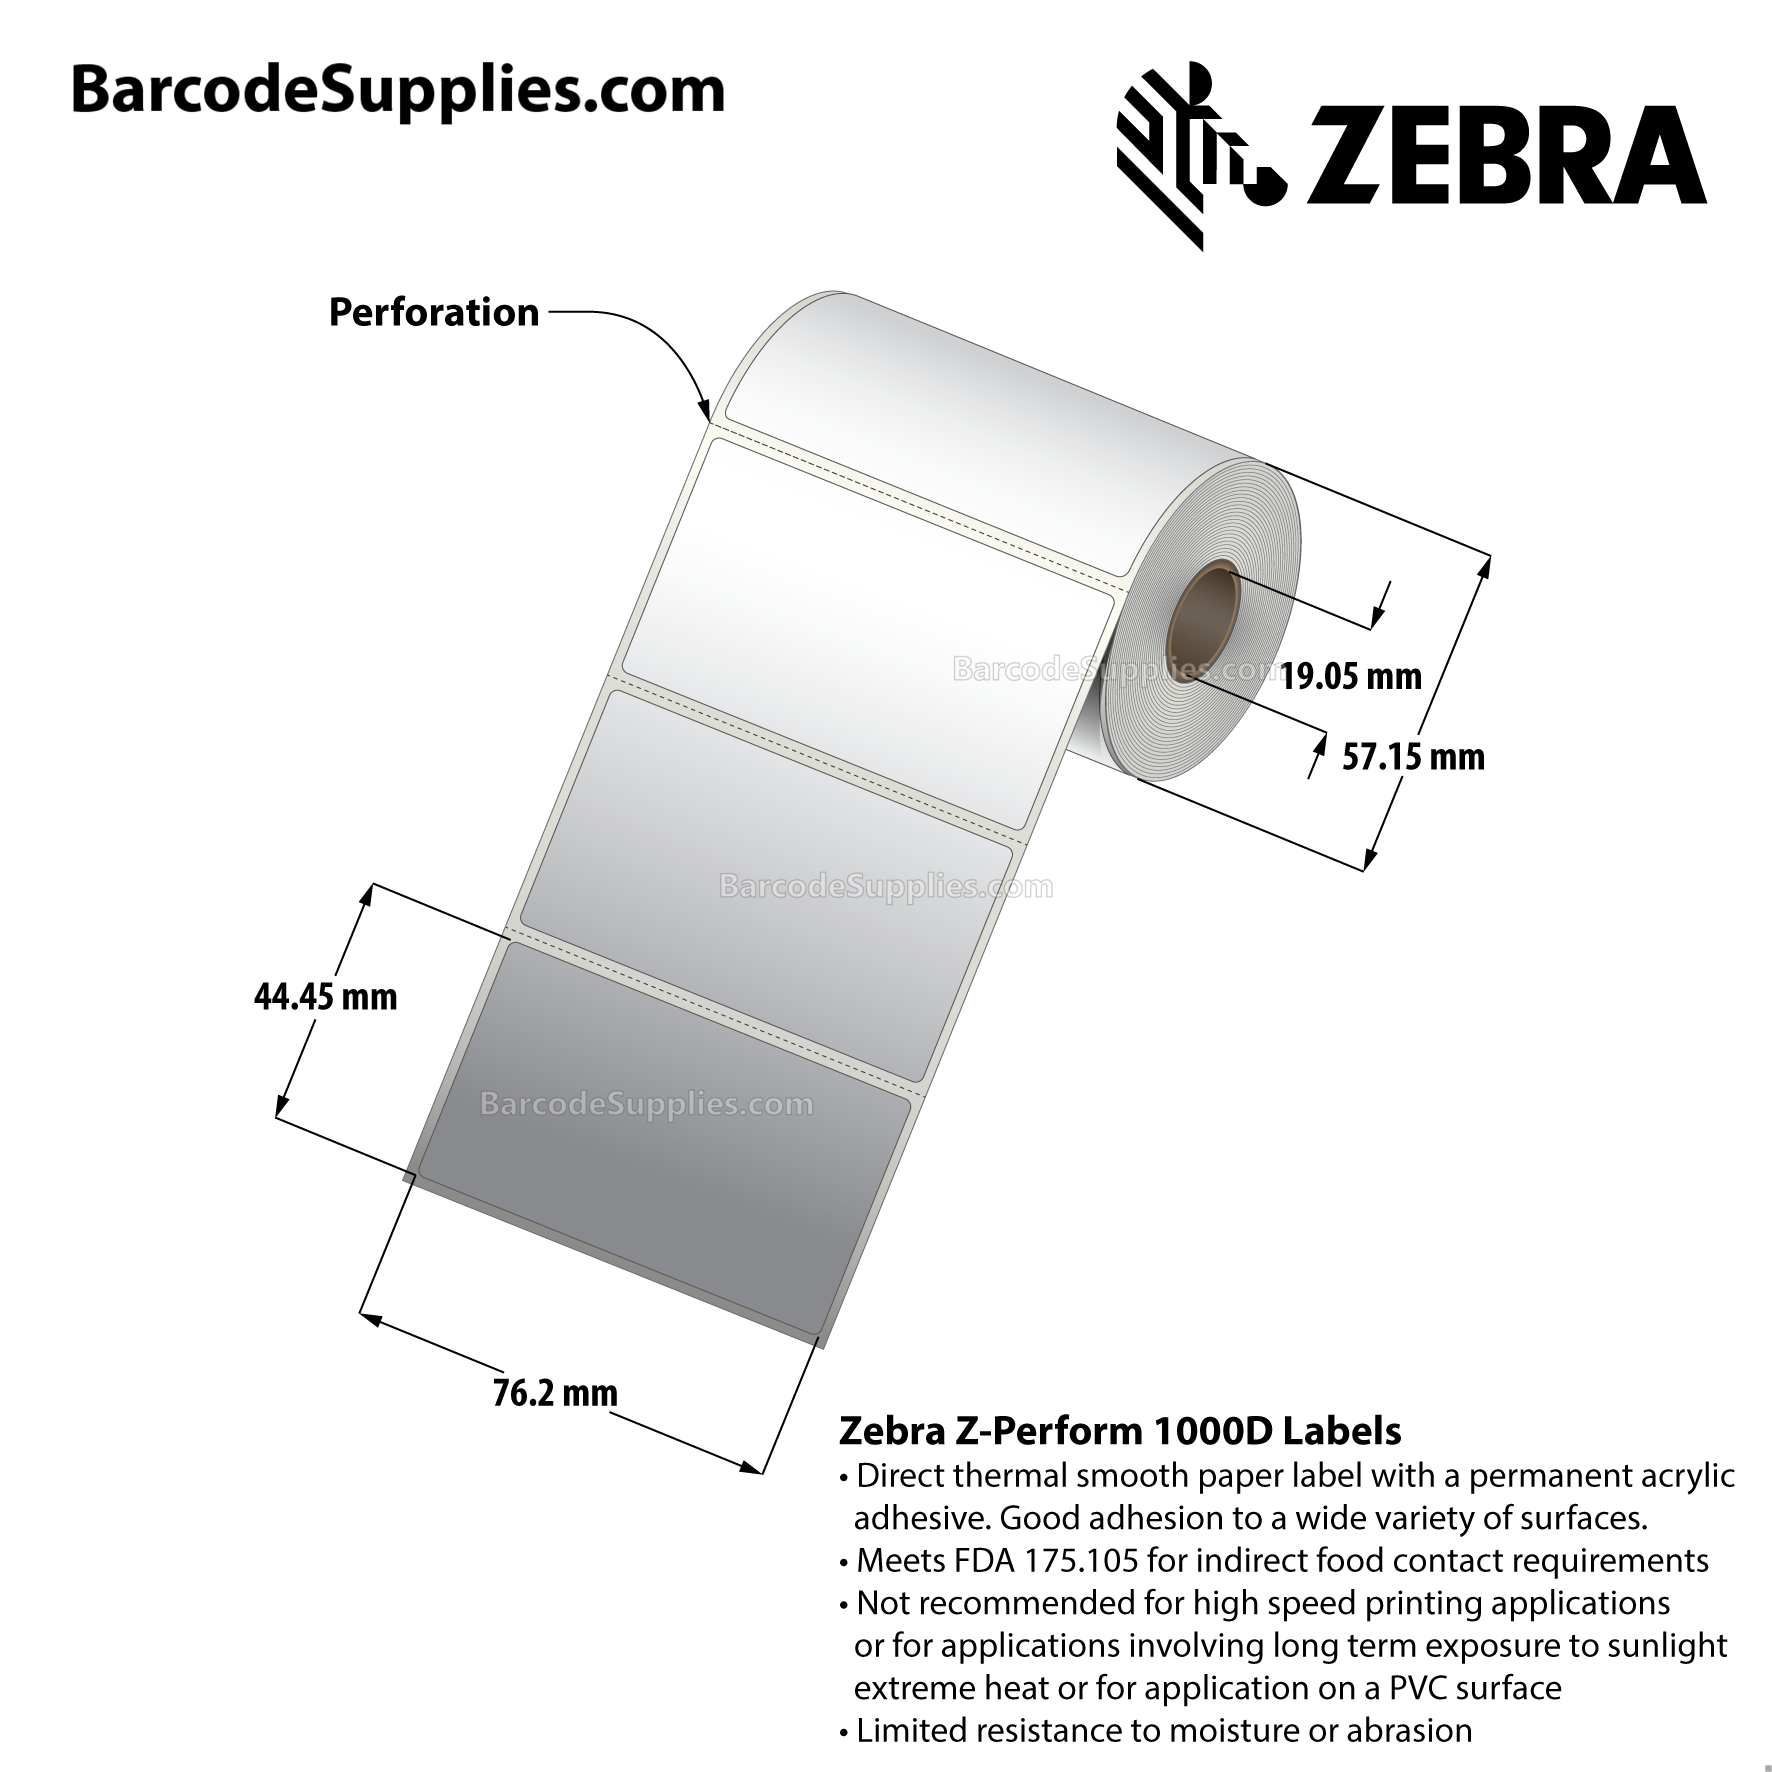 3 x 1.75 Direct Thermal White Z-Perform 1000D Labels With Permanent Adhesive - Perforated - 260 Labels Per Roll - Carton Of 36 Rolls - 9360 Labels Total - MPN: 10026371